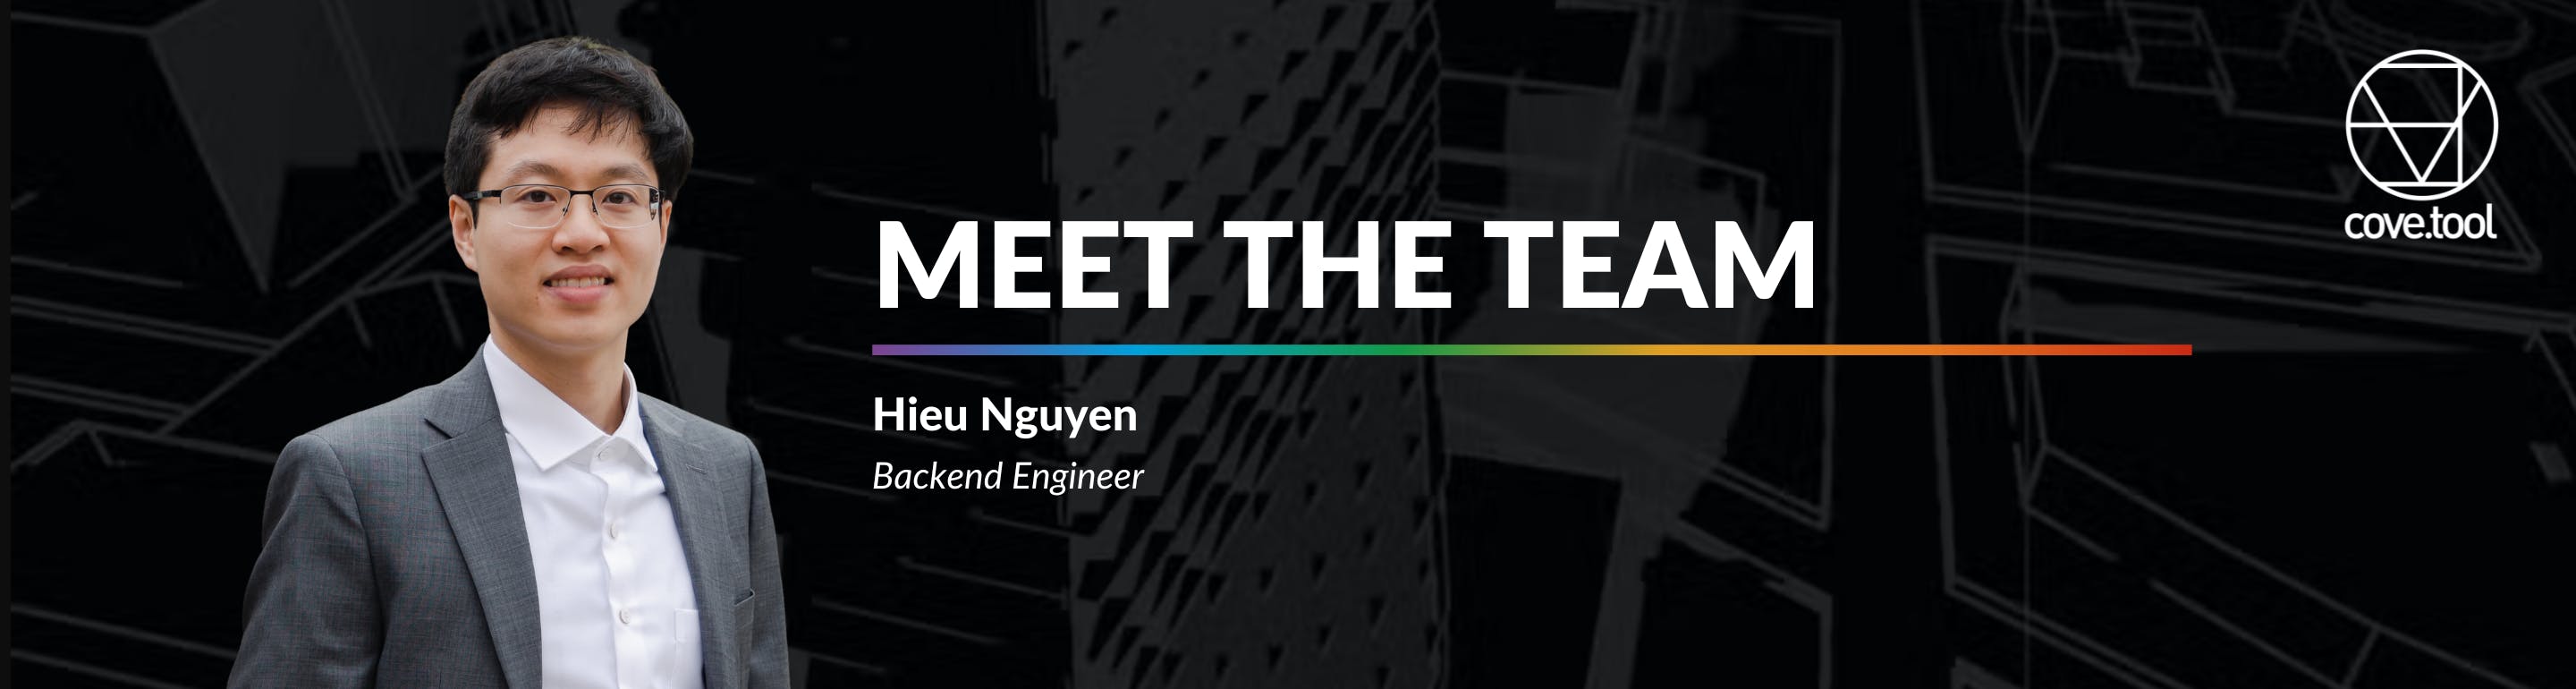 Meet one of our talented team members, Hieu Nguyen, cove.tool’s Backend Engineer.